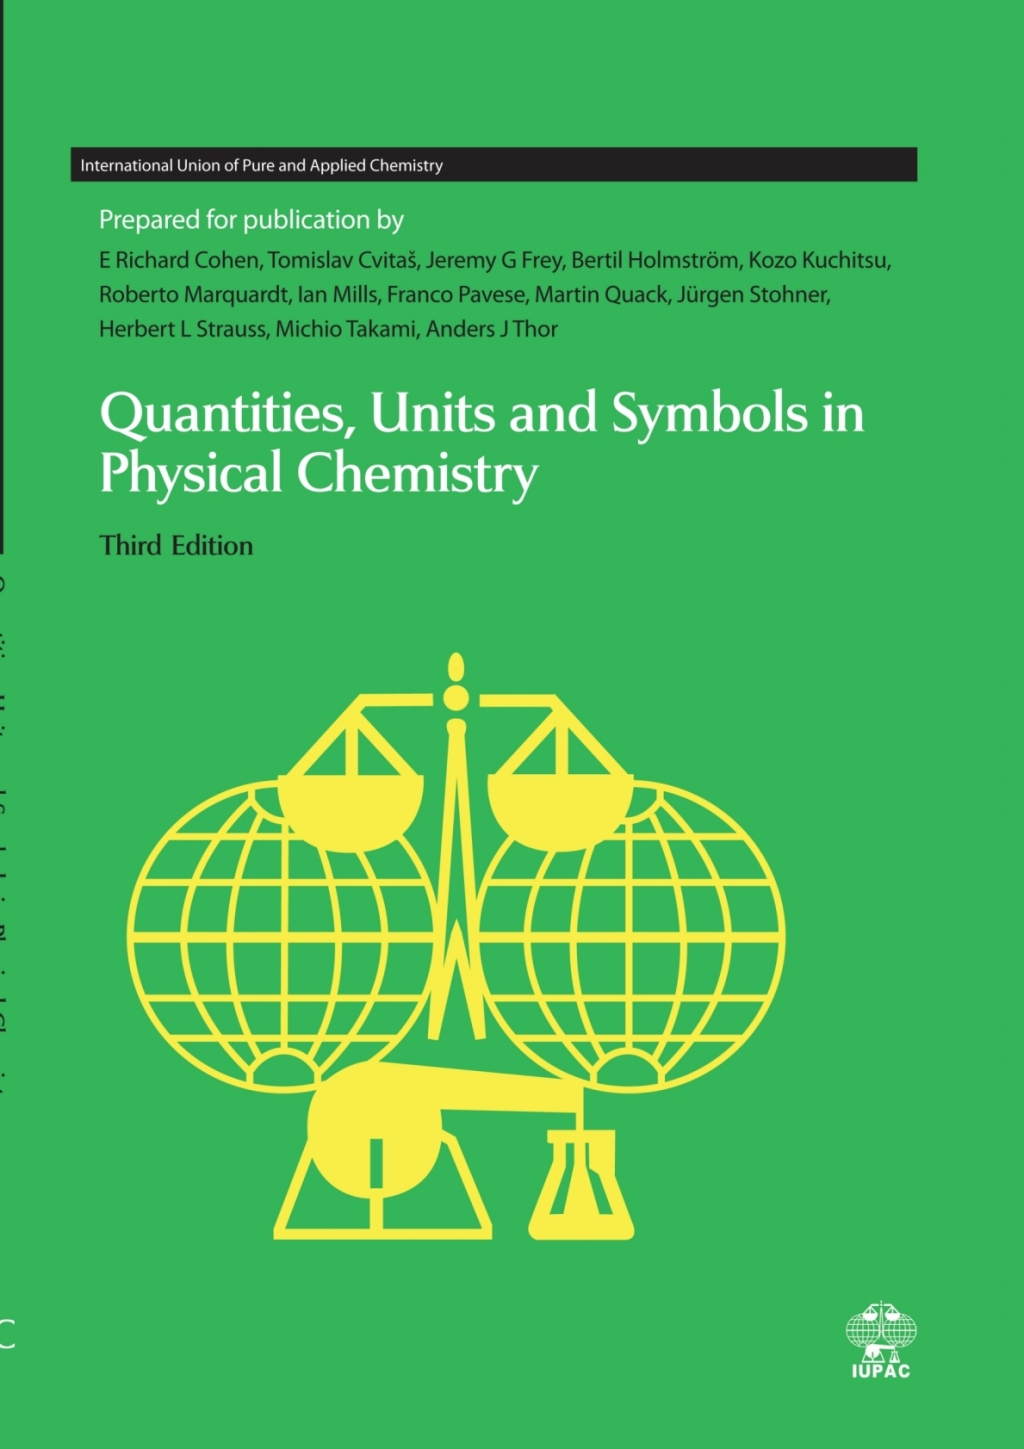 Quantities  Units and Symbols in Physical Chemistry - 3rd Edition (eBook)